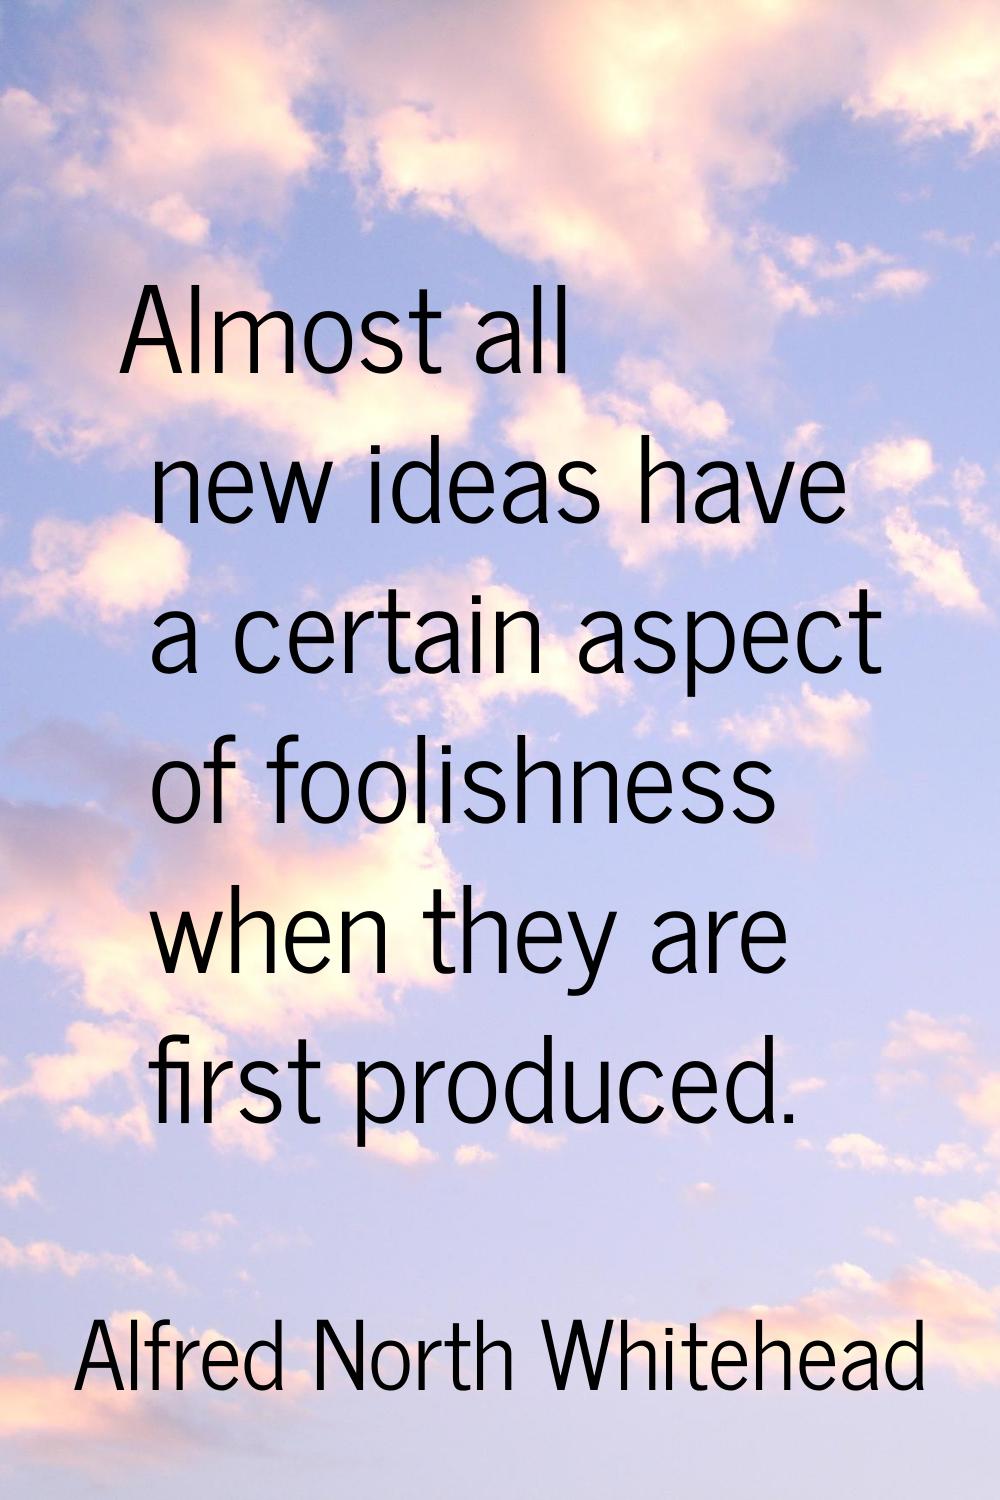 Almost all new ideas have a certain aspect of foolishness when they are first produced.